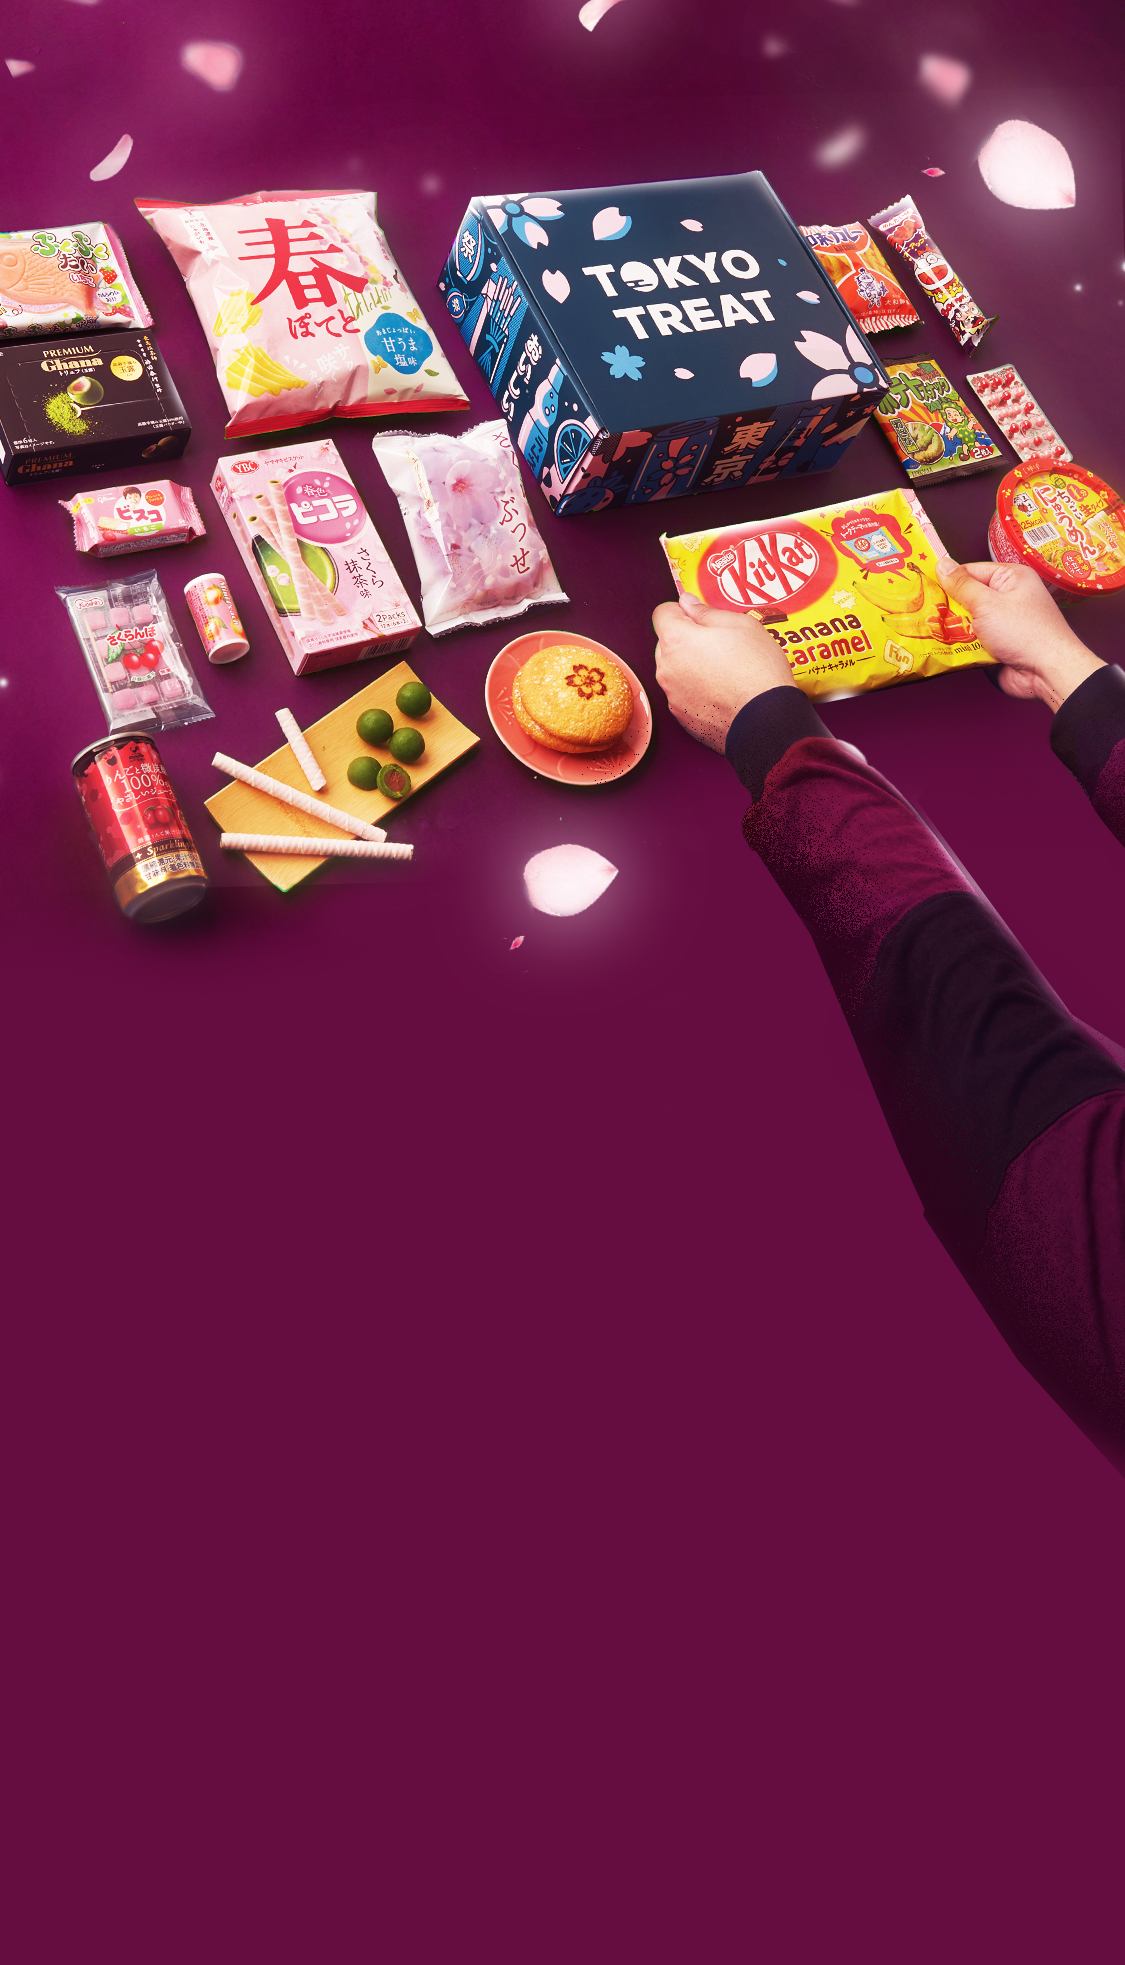 TokyoTreat box sits against a dark purple backdrop, surrounded by box items and cherry blossom petals.